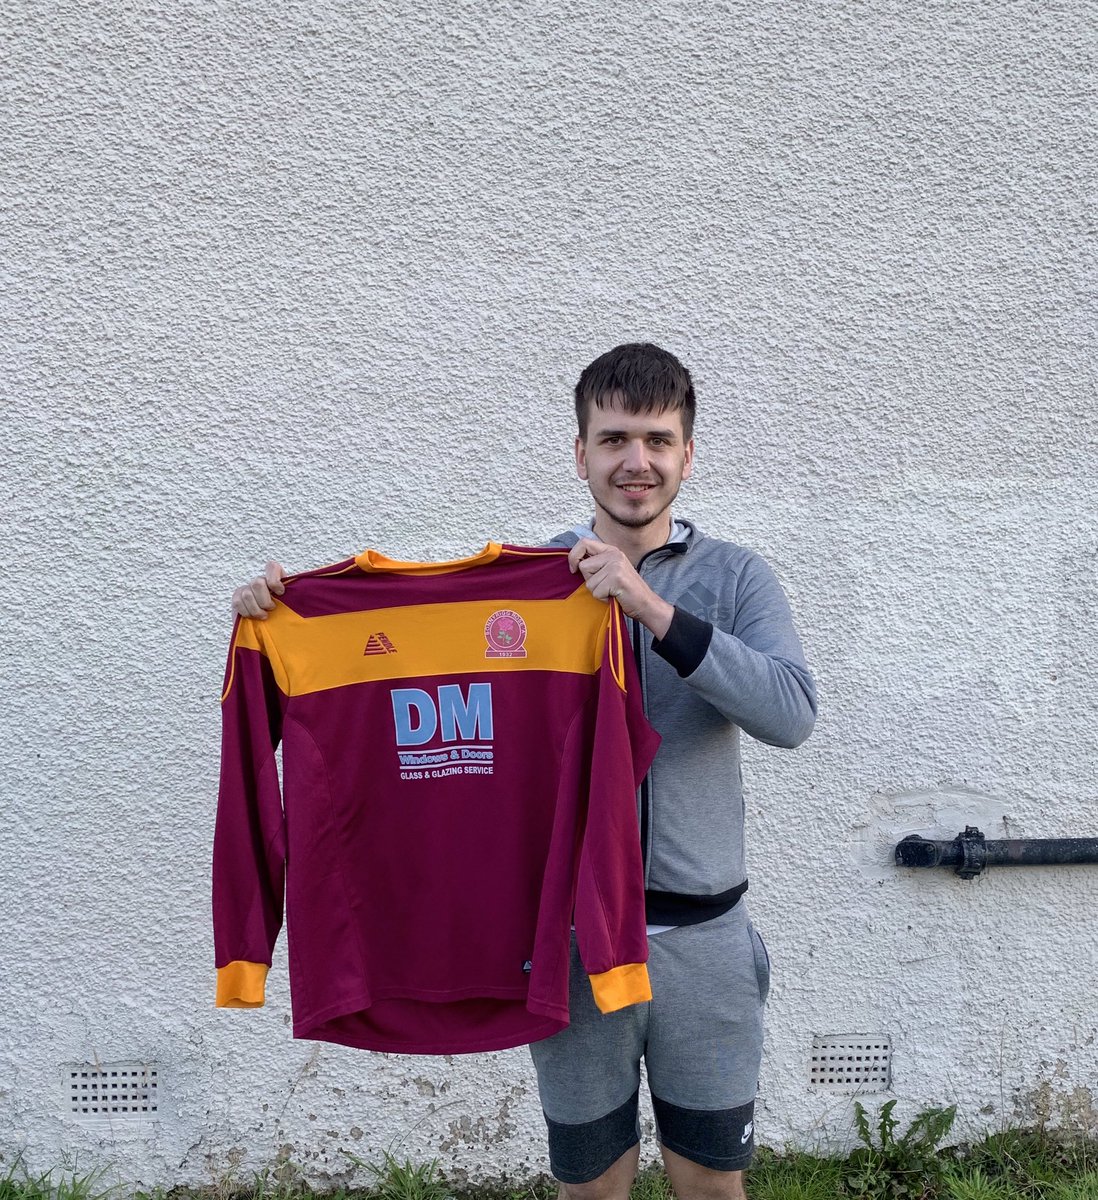 ✍️ Next up we have Jason Mcarthur who has also signed for the season. Jason is a strong and steady fullback who is solid in the tackle and also very capable in the air. He has a great attitude and is always giving 100%.